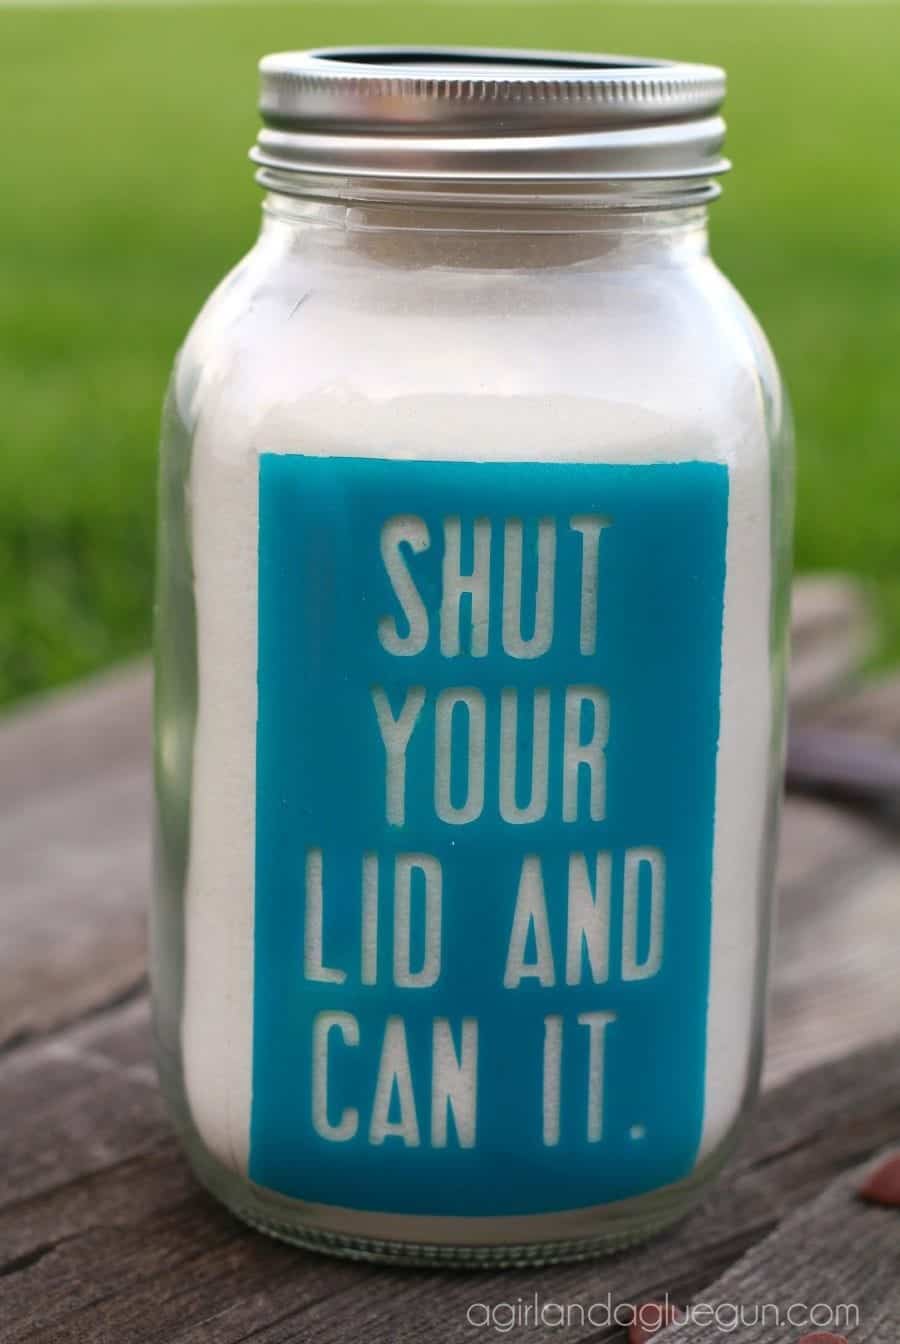 mason-jar-shut-your-lid-and-can-it-900x1344